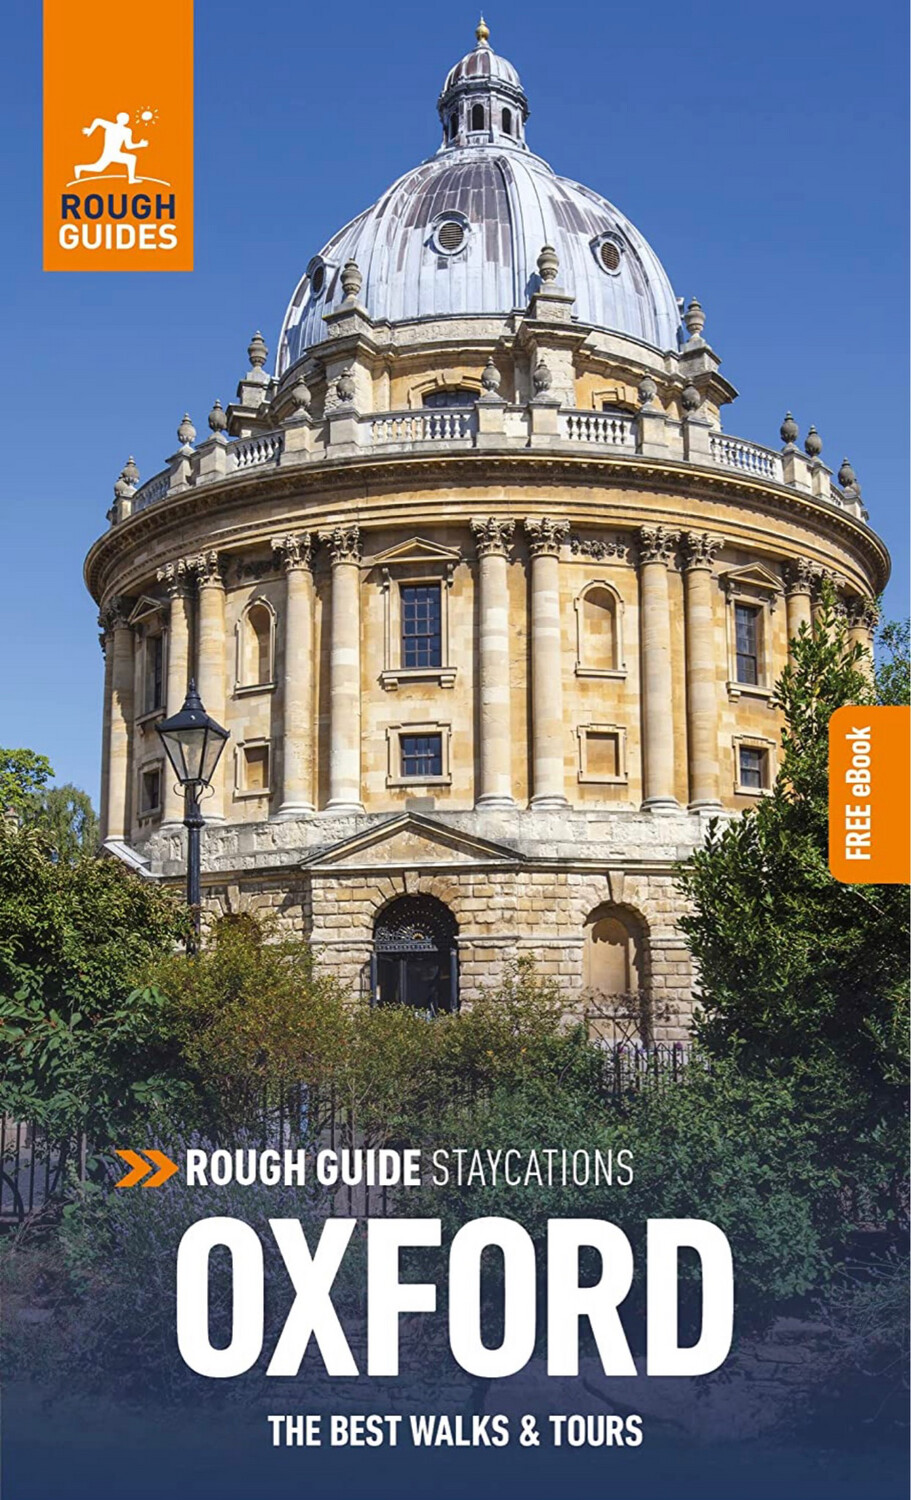 Rough Guide Staycations Oxford